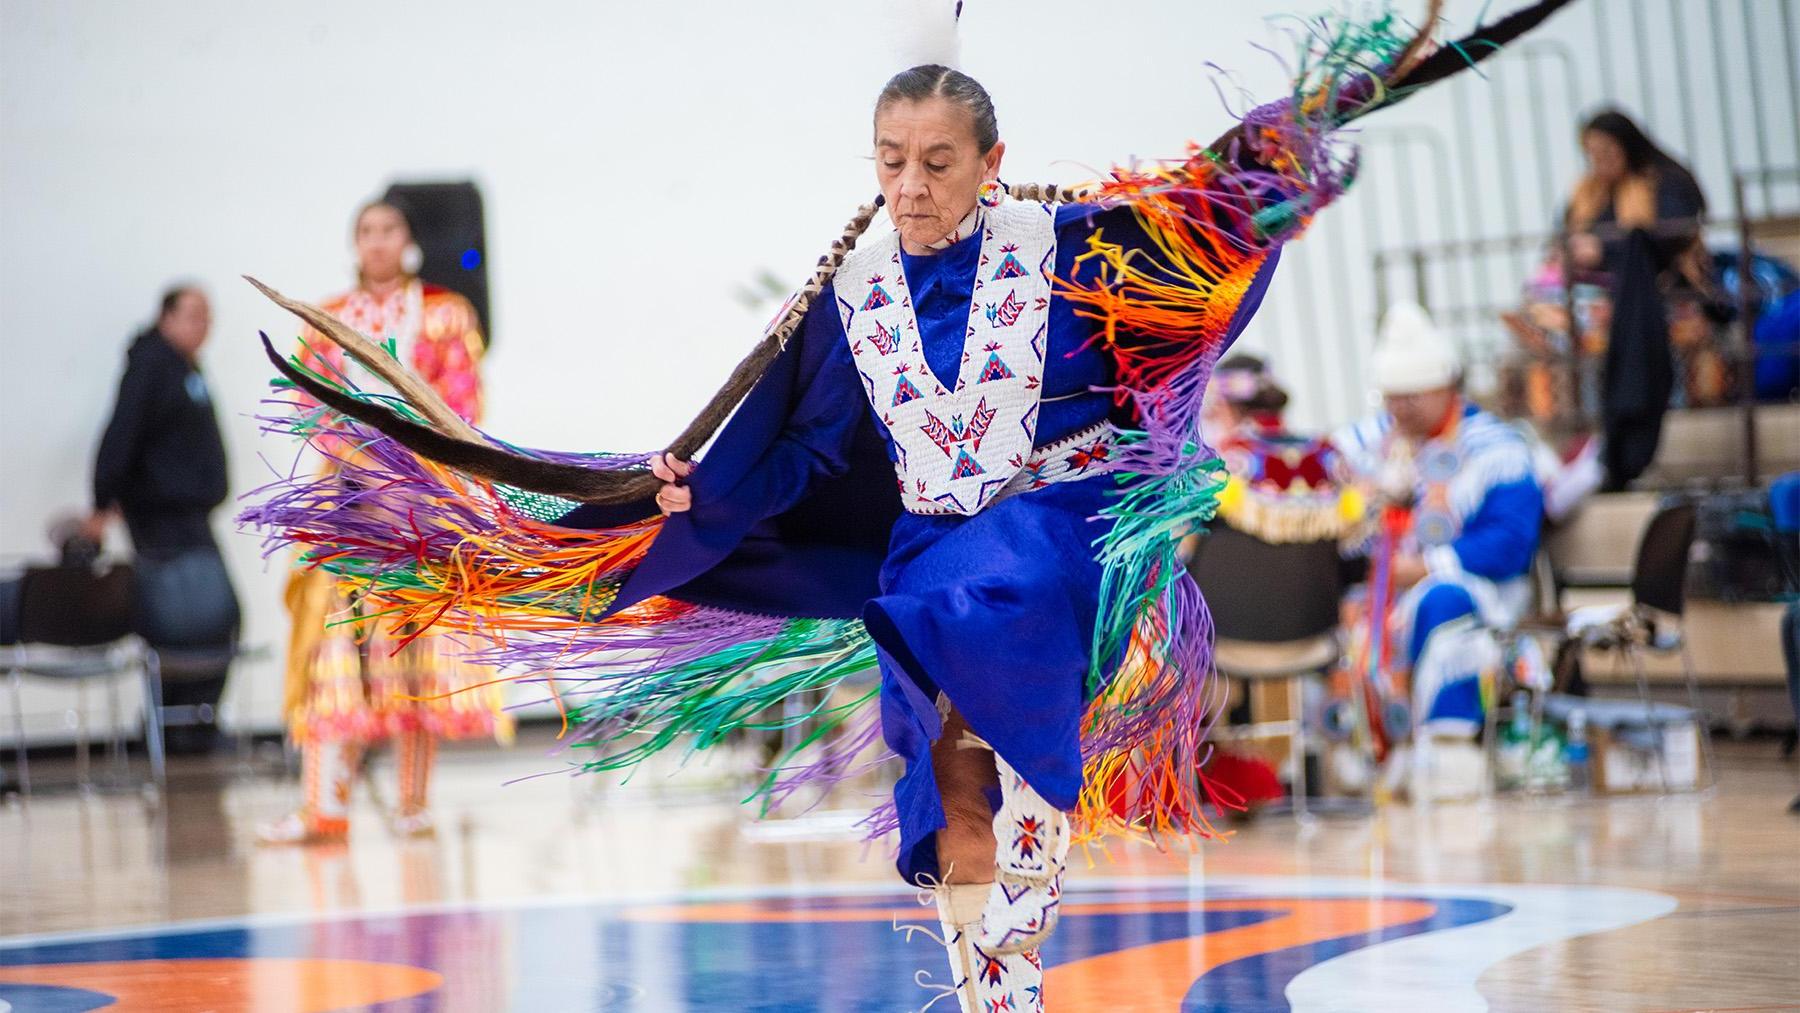 A native American doing a traditional dance.